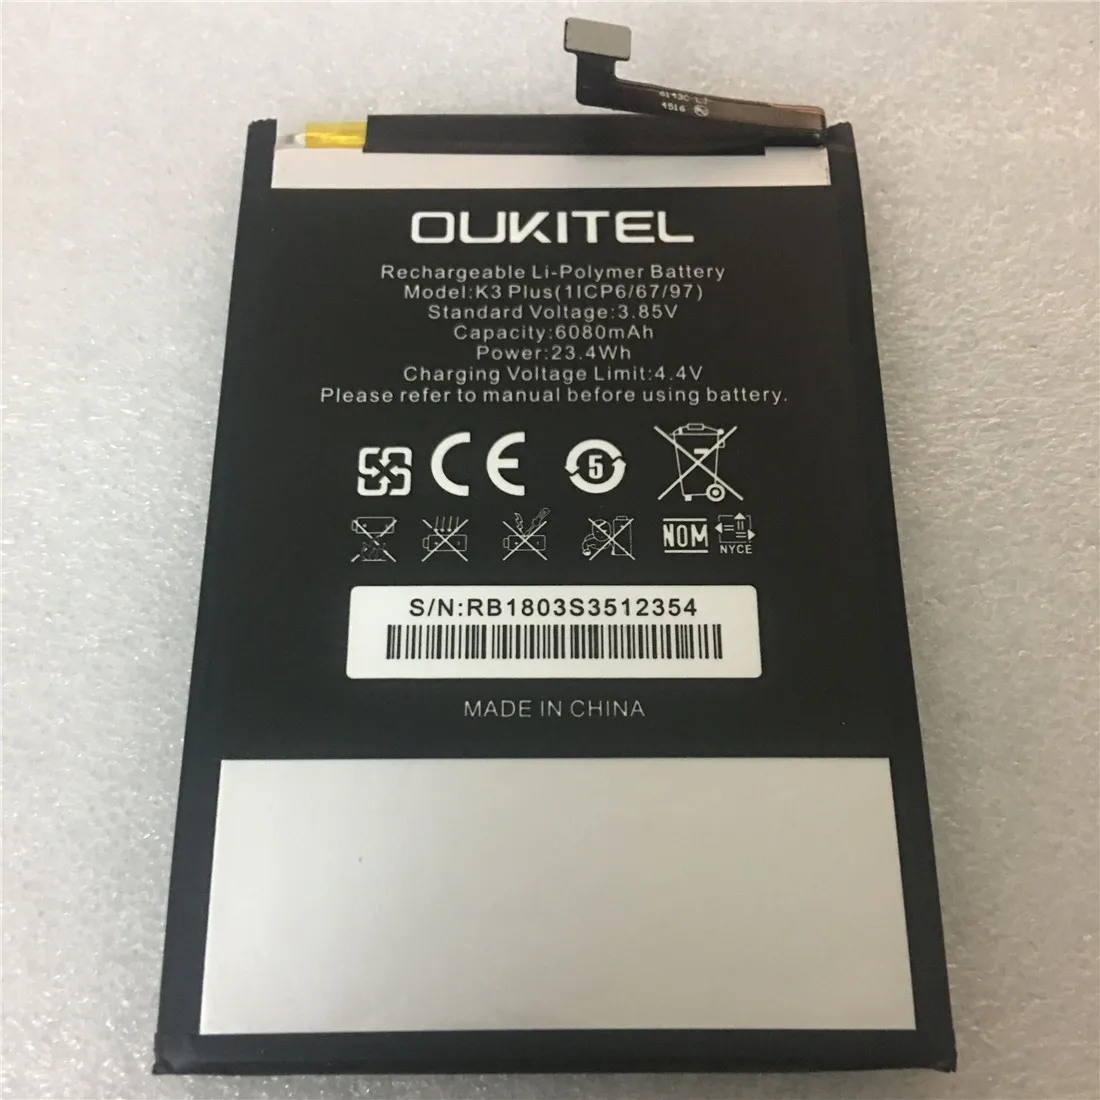 Mobile phone battery real OUKITEL K3 PLUS battery 6080mAh Long standby time High capacit OUKITEL Mob